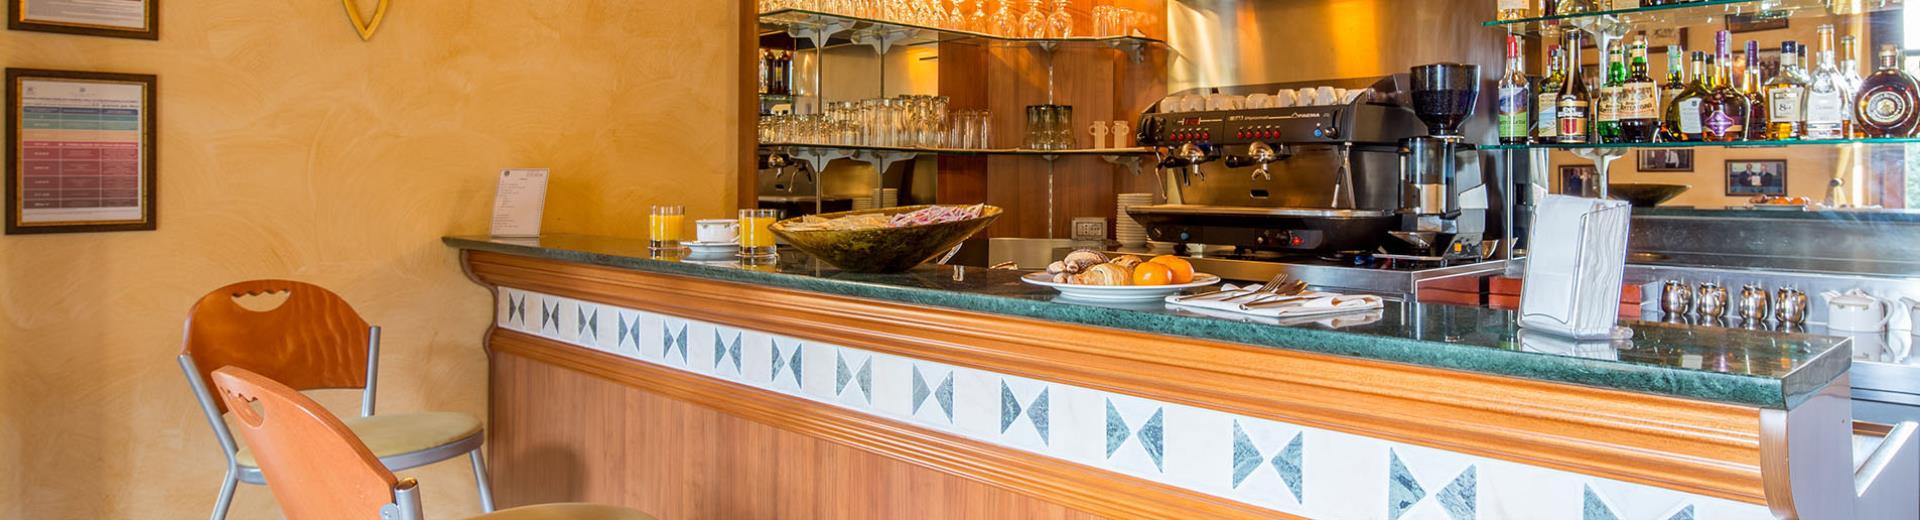 The Lounge Bar of Best Western Plus Hotel Le Rondini, near Turin and the airport, is ideal for organizing and personalizing coffee breaks, business lunches and aperitifs